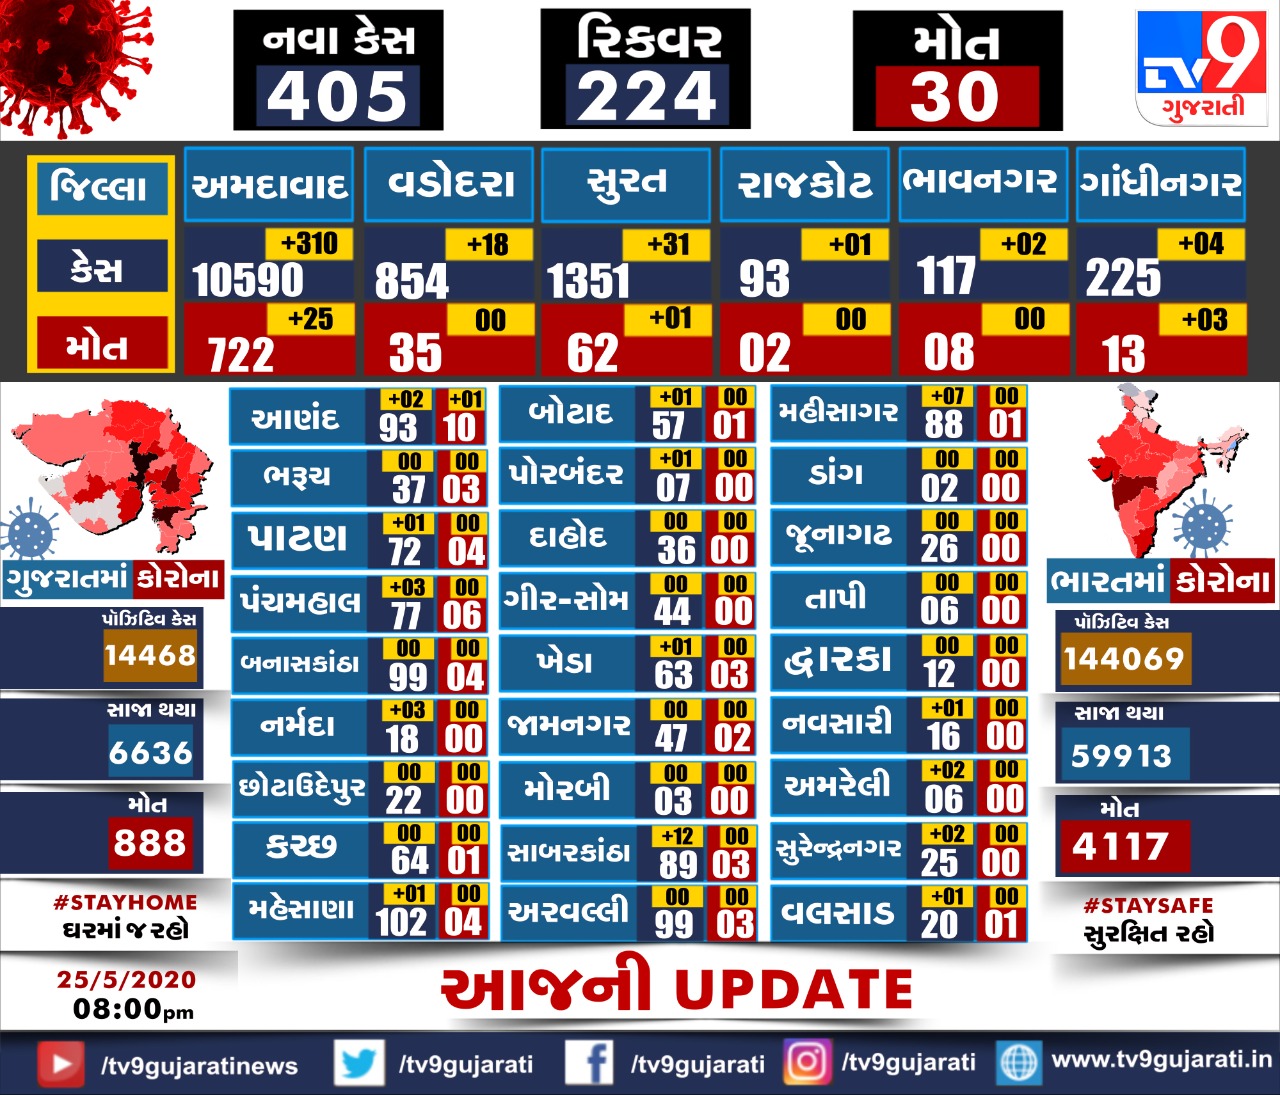 More 405 tested positive for coronavirus in last 24 hrs in Gujarat, state's tally touches 14468 mark